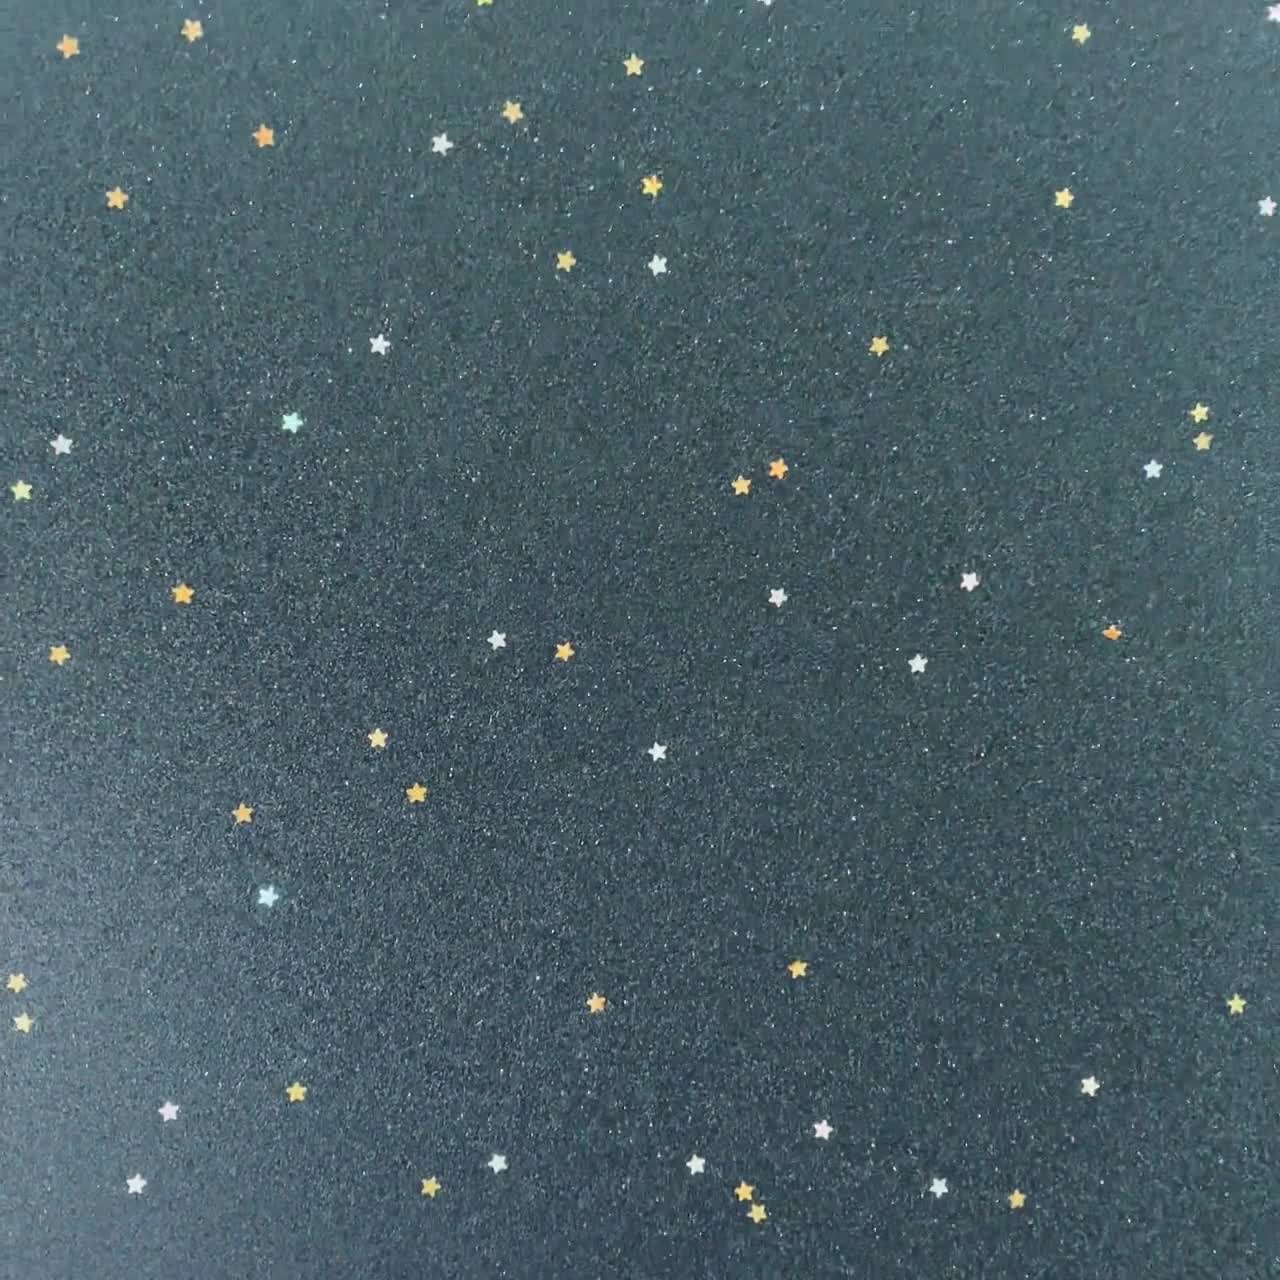 12x12 Black With Stars Glitter Cardstock, 300gsm Cardstock Paper, Premium  Glitter Cardstock Paper, Paper for Crafts, Black With Stars Paper 